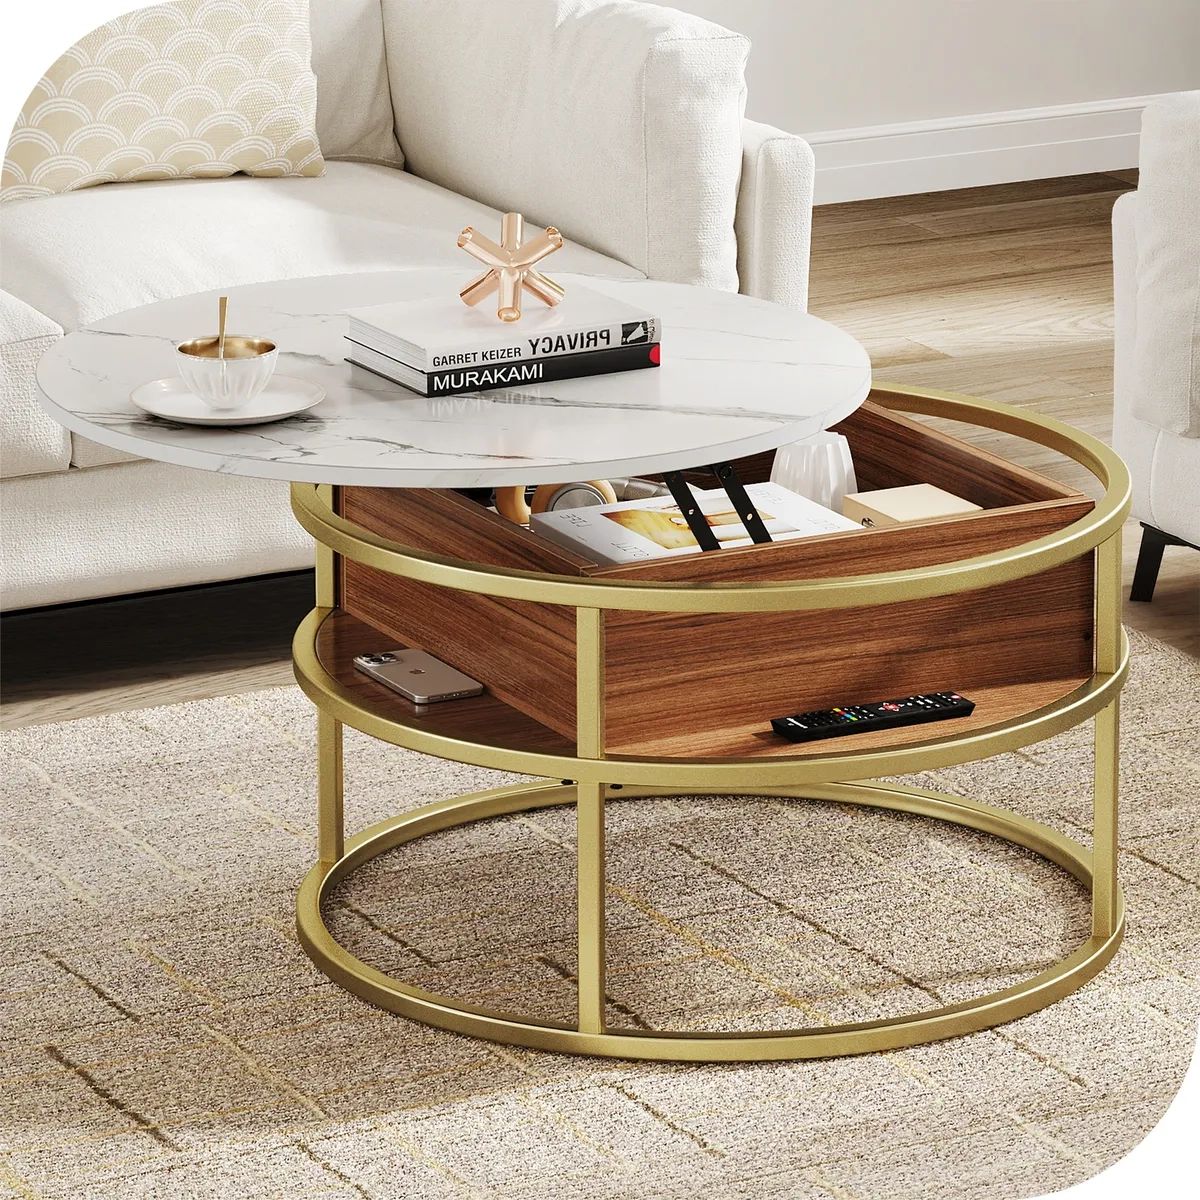 Modern Coffee Table Round Lift Top With Hidden Compartment Wooden Center  Table | Ebay Throughout Modern Coffee Tables With Hidden Storage Compartments (View 8 of 15)